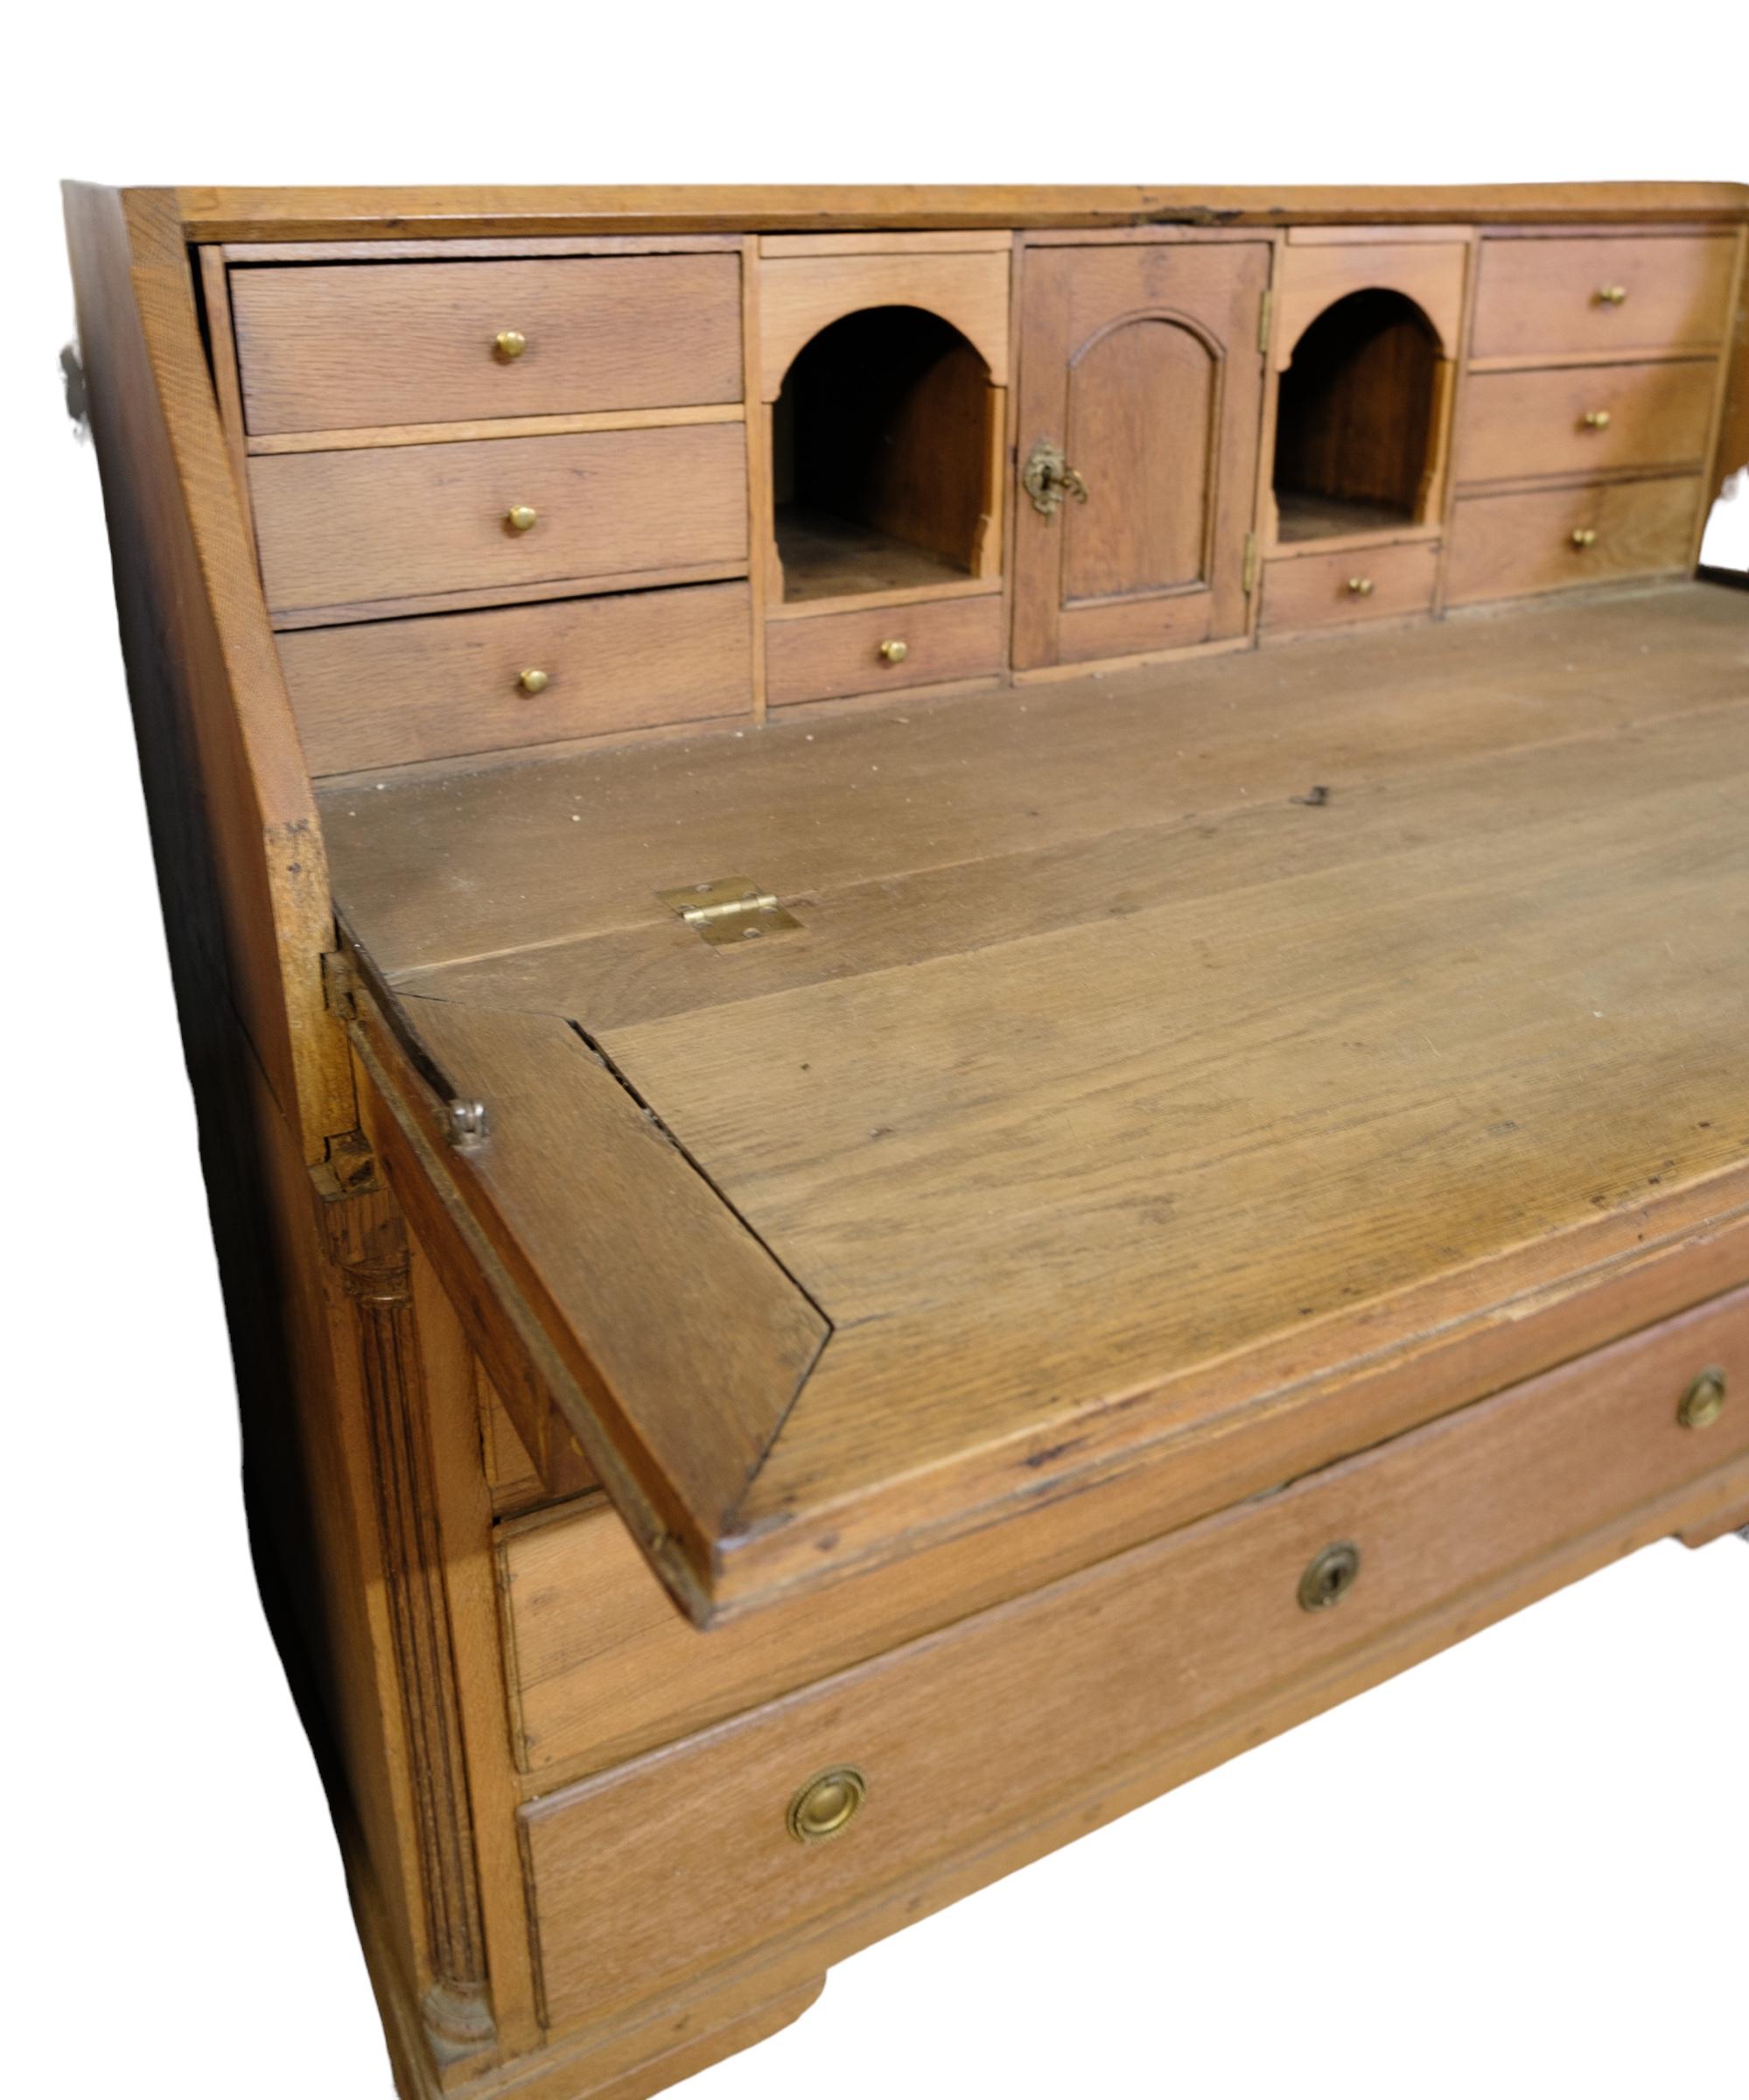 Danish Louis Seize style chatol made in oak from around 1780s For Sale